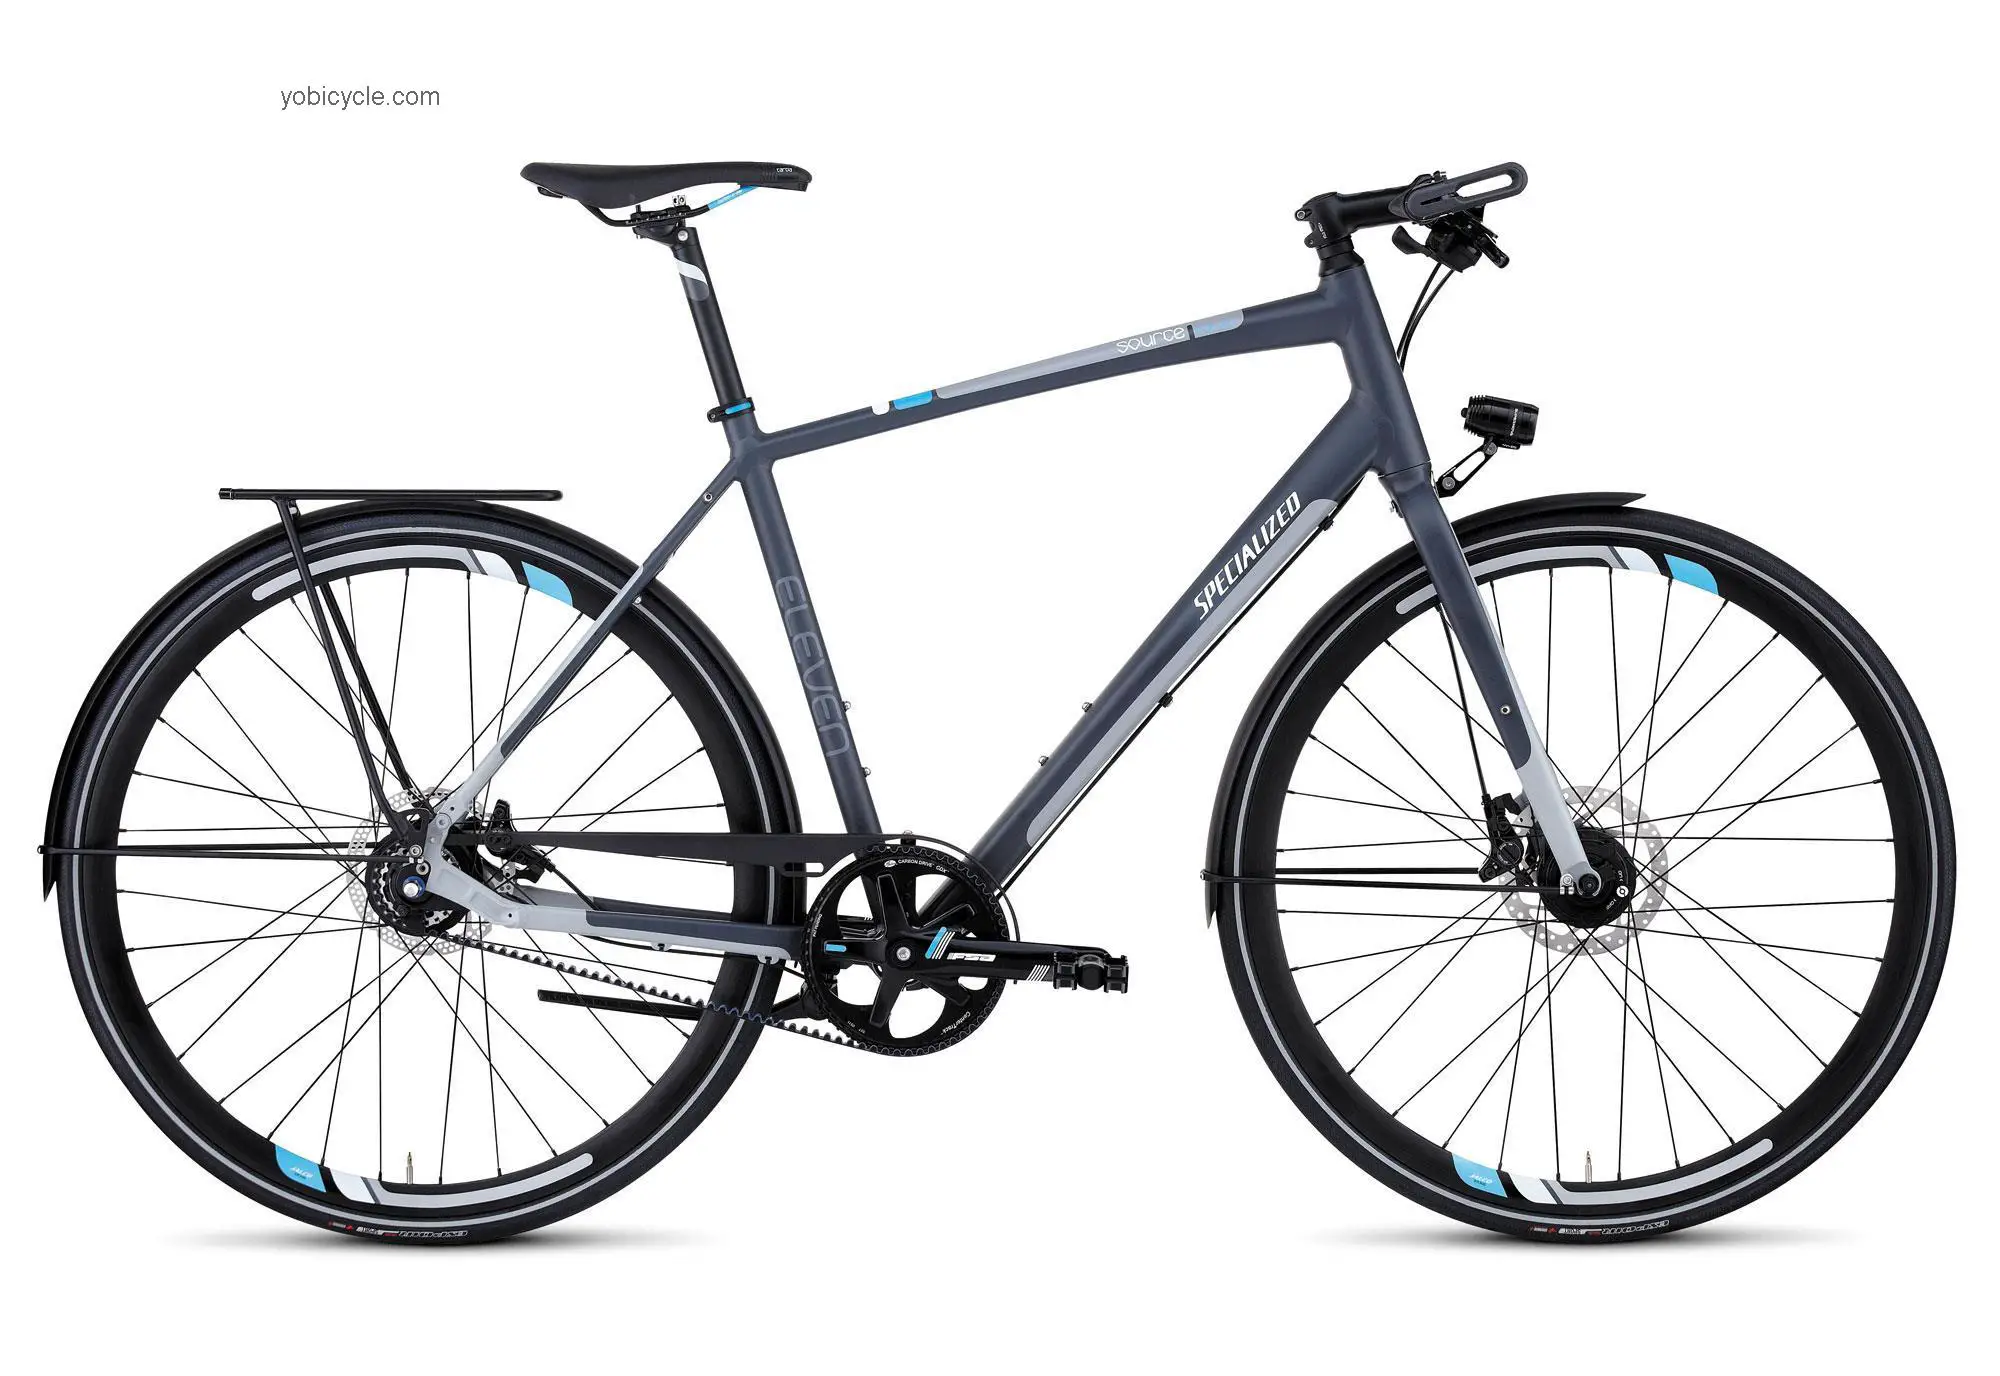 Specialized Source Eleven competitors and comparison tool online specs and performance